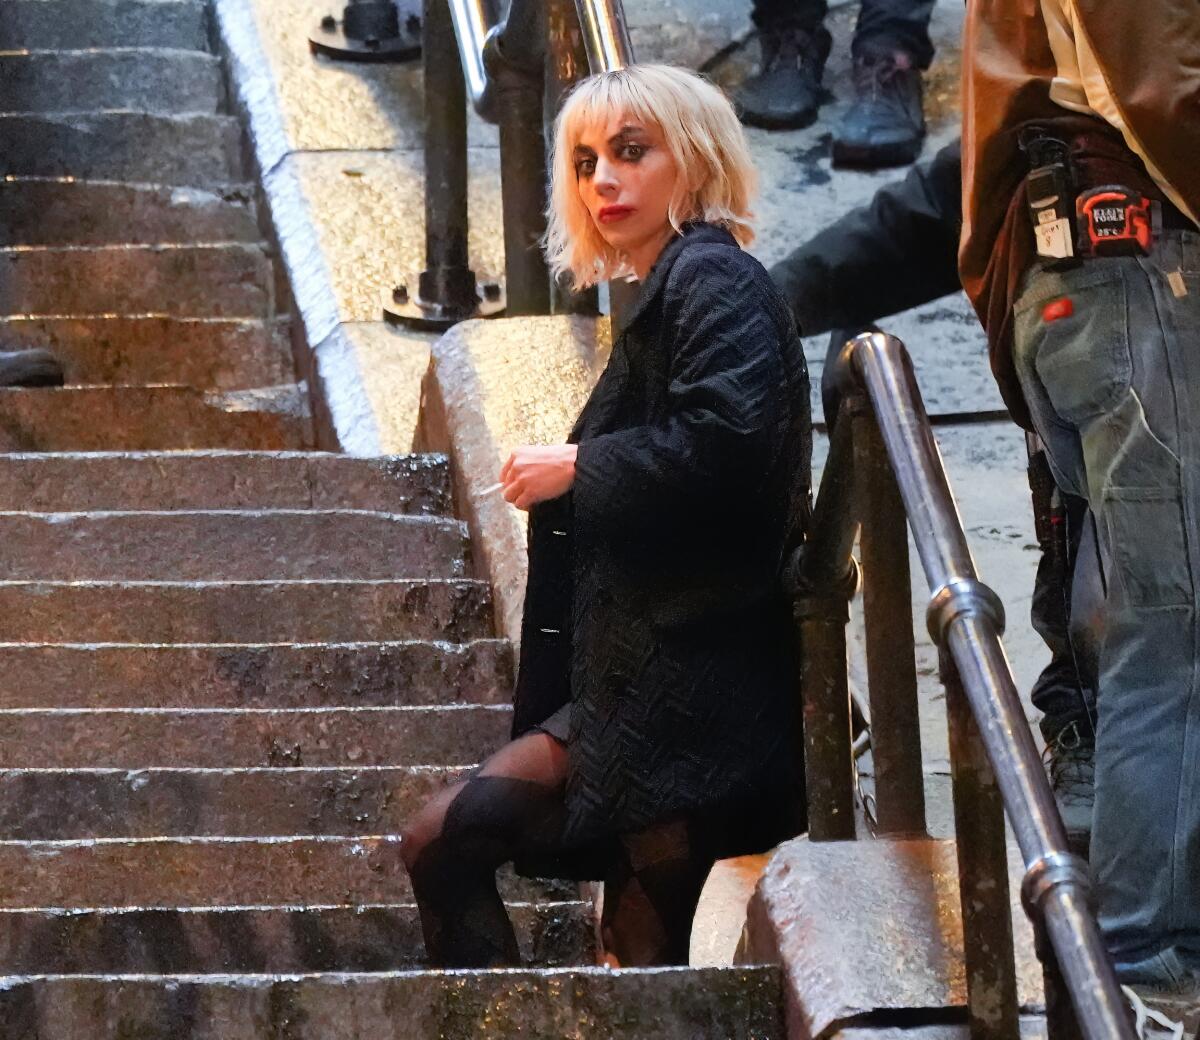 Lady Gaga leans against a railing on a staircase in character and makeup as Harley Quinn